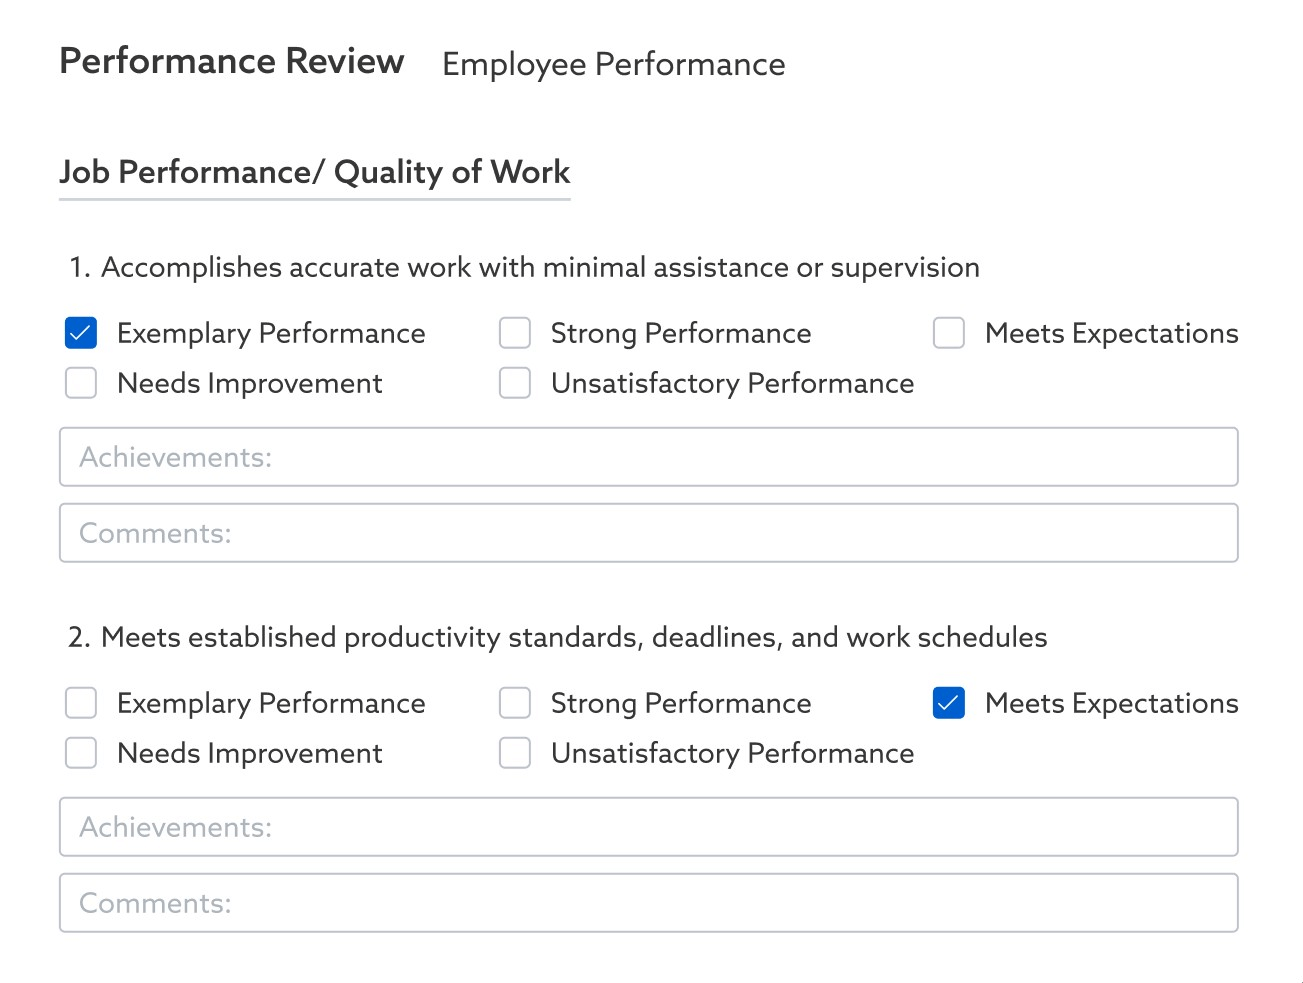 WebHR software - performance review template